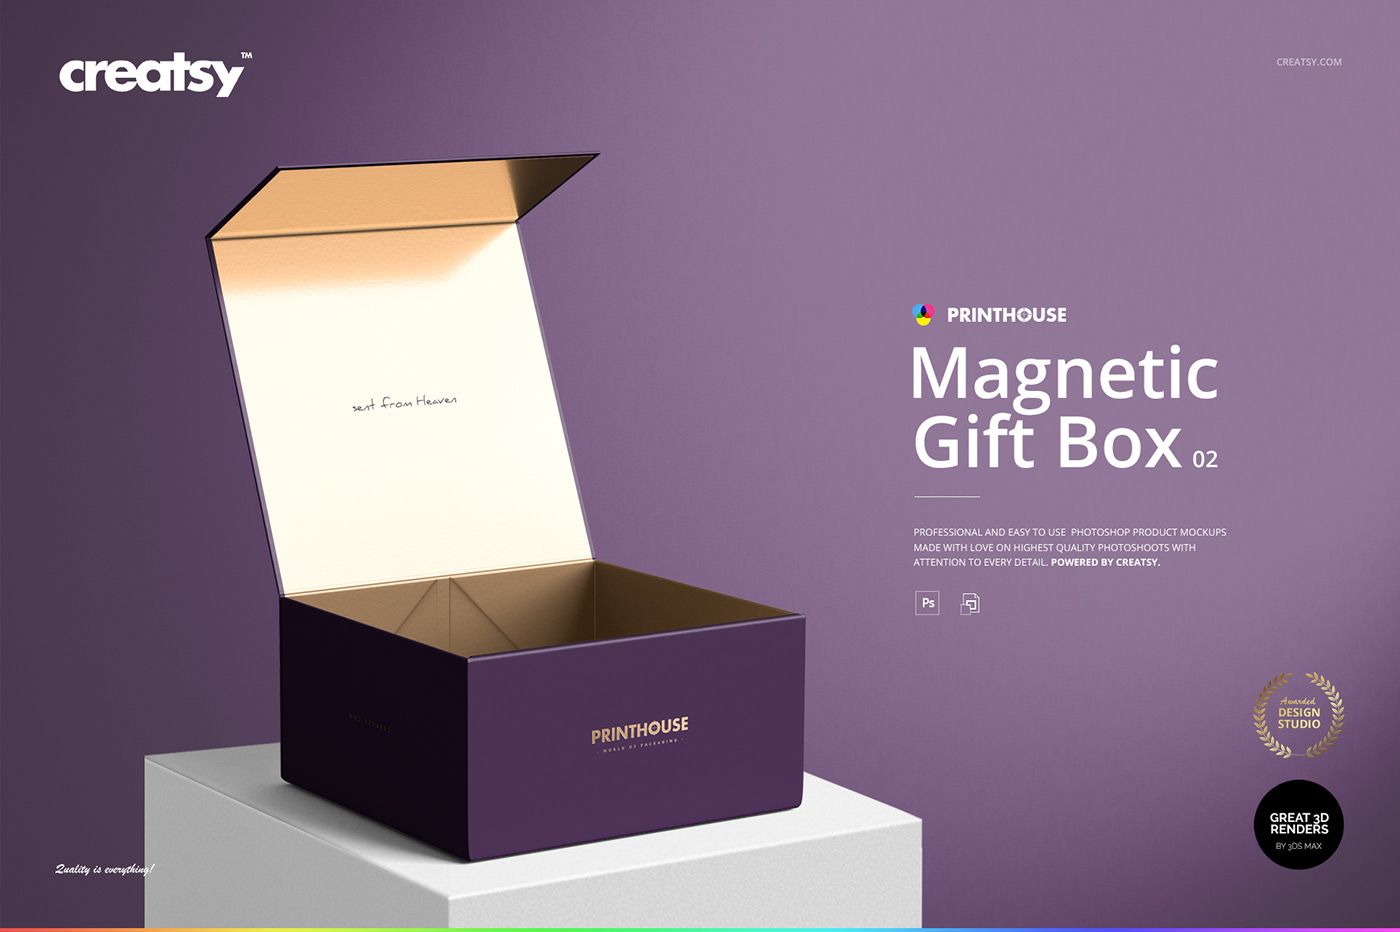 mock-up Mockup mockups template box gift Magnetic Promotional Packaging boxes